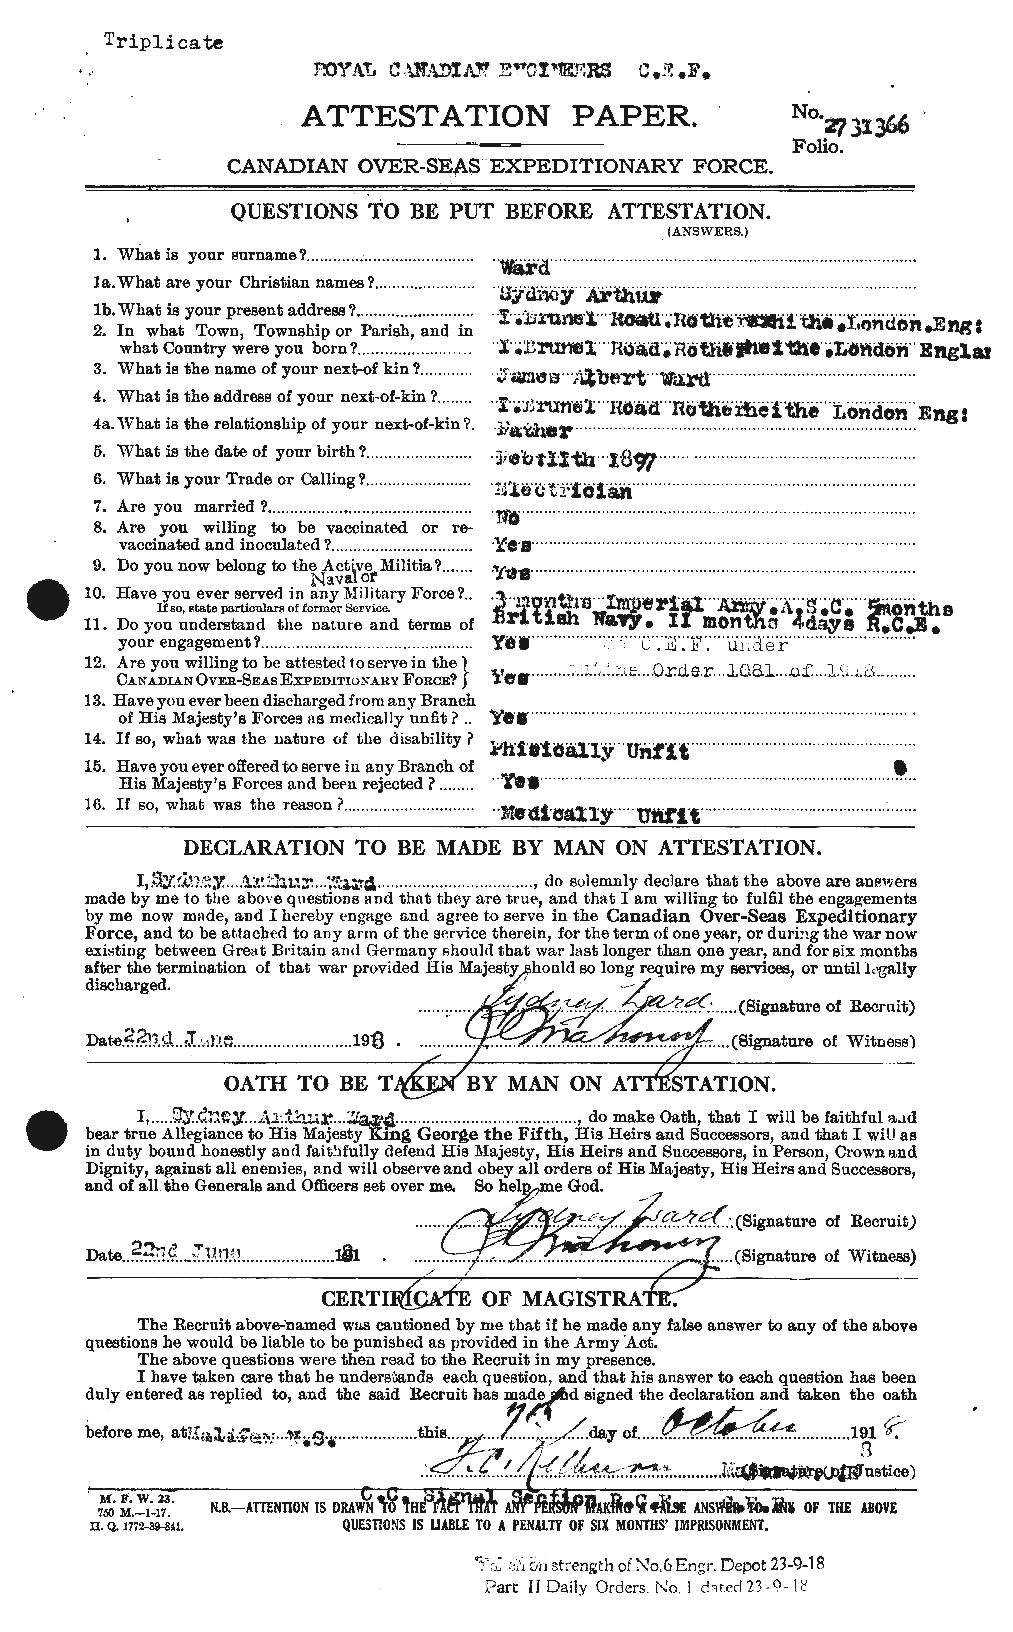 Personnel Records of the First World War - CEF 659703a